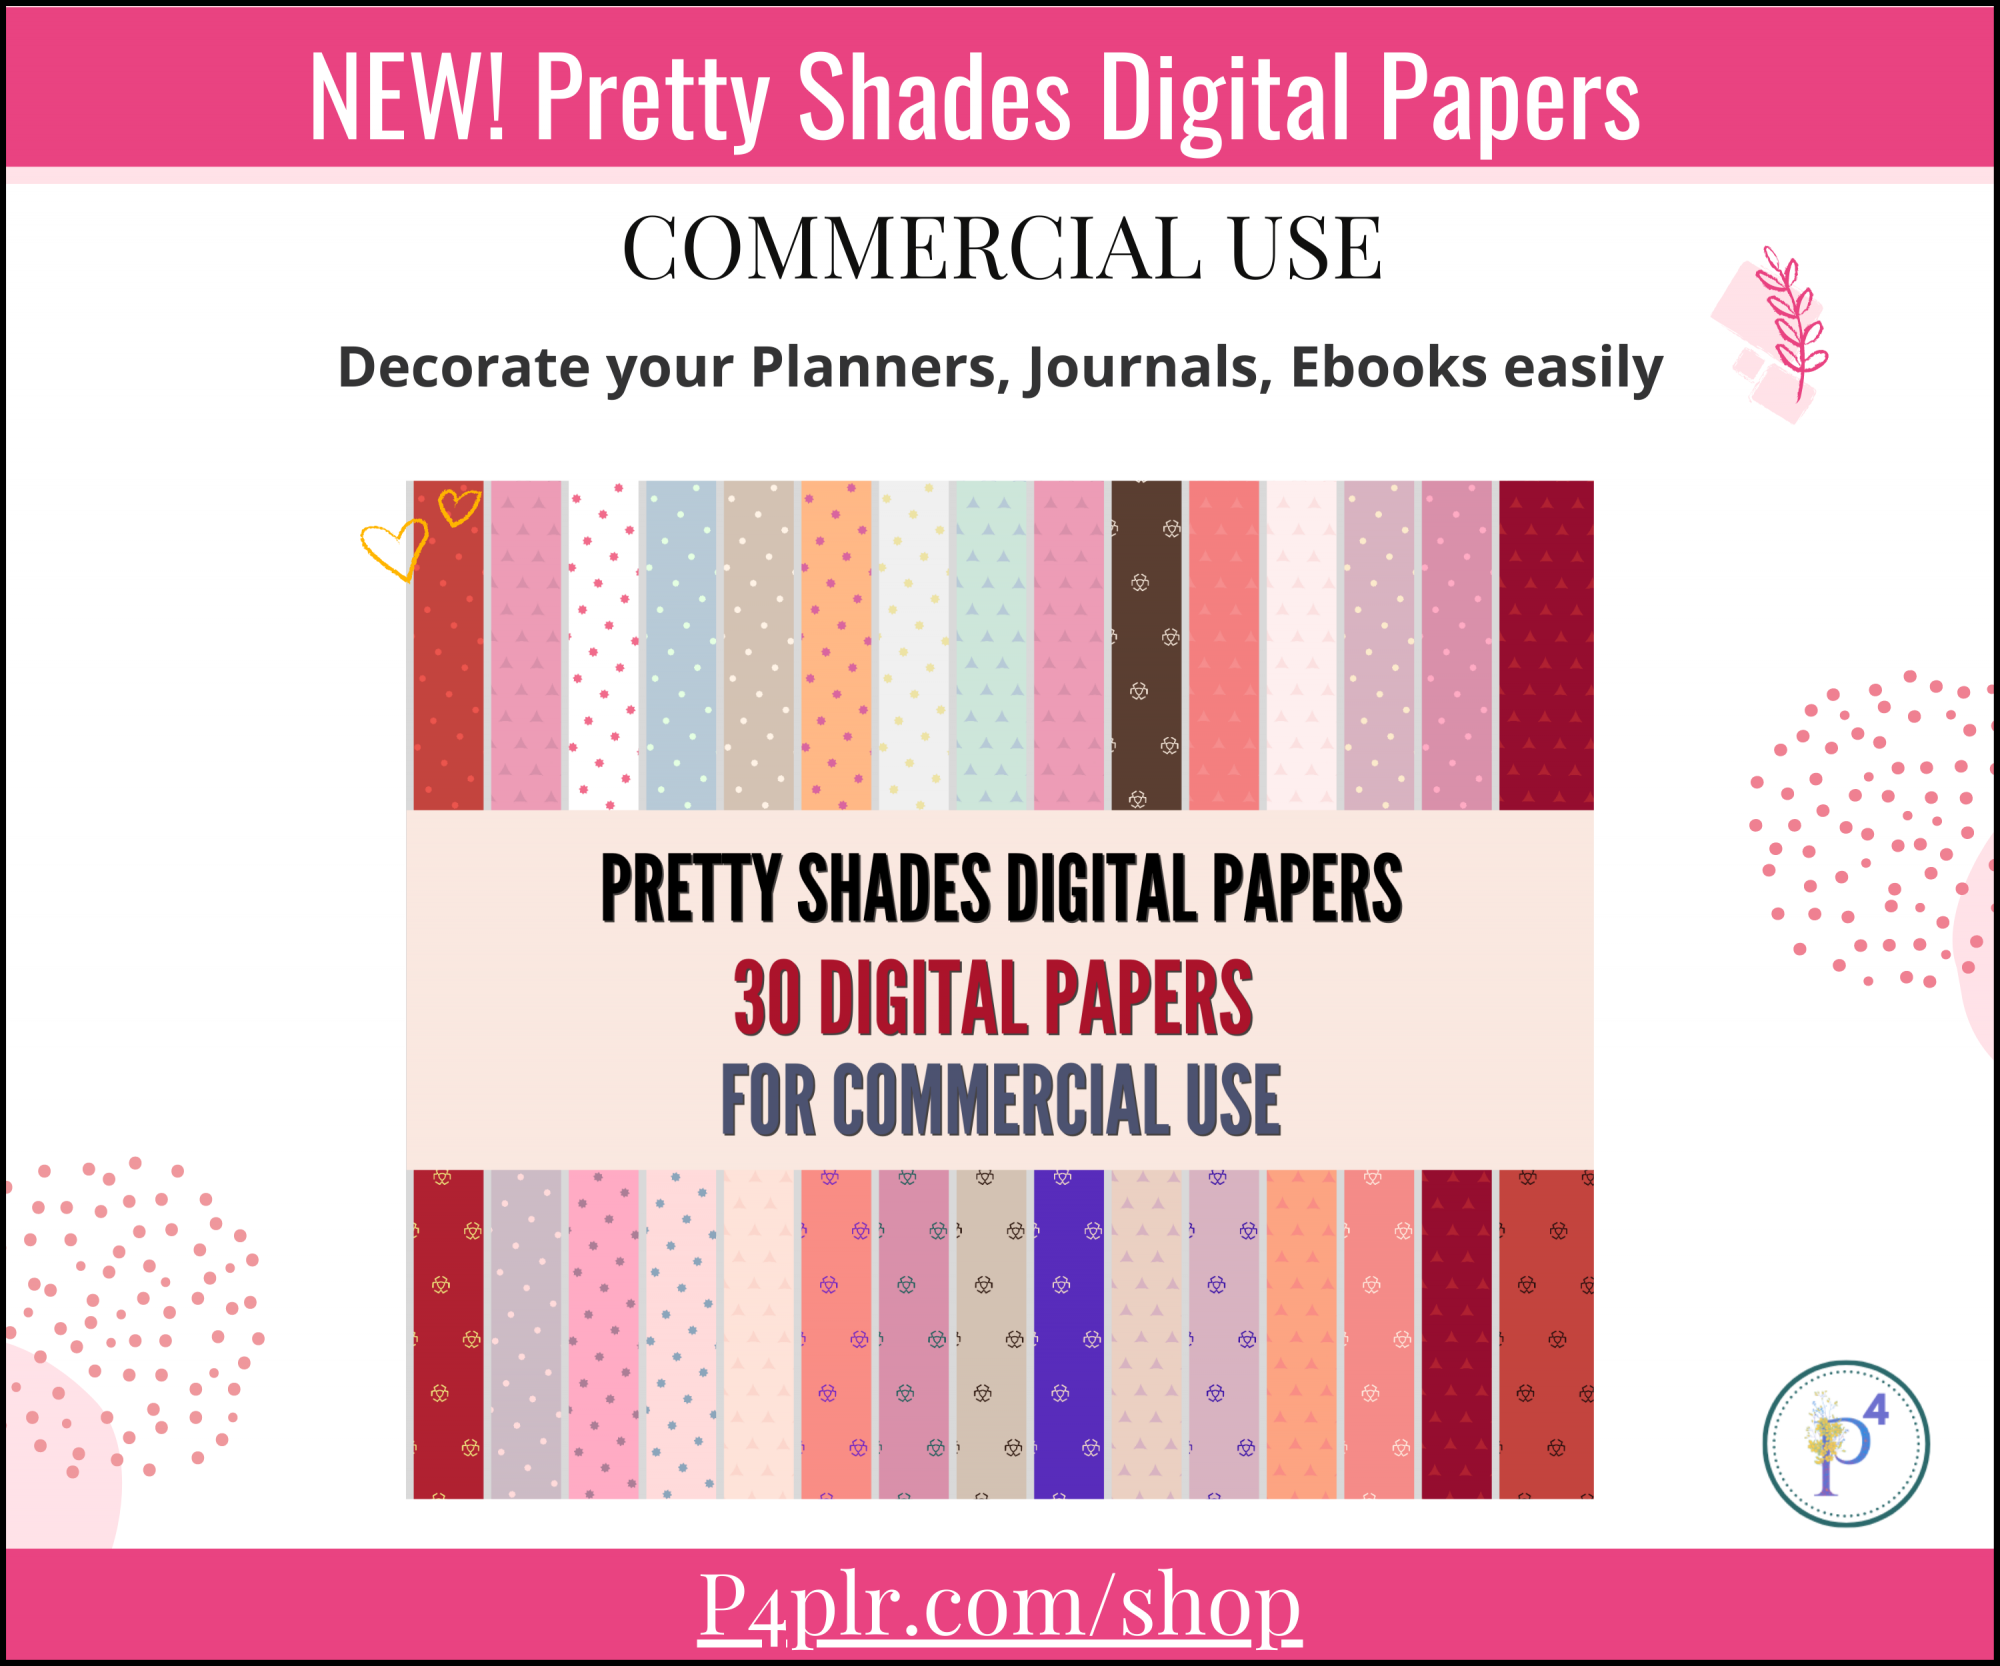 " Pretty Shades" Digital Papers